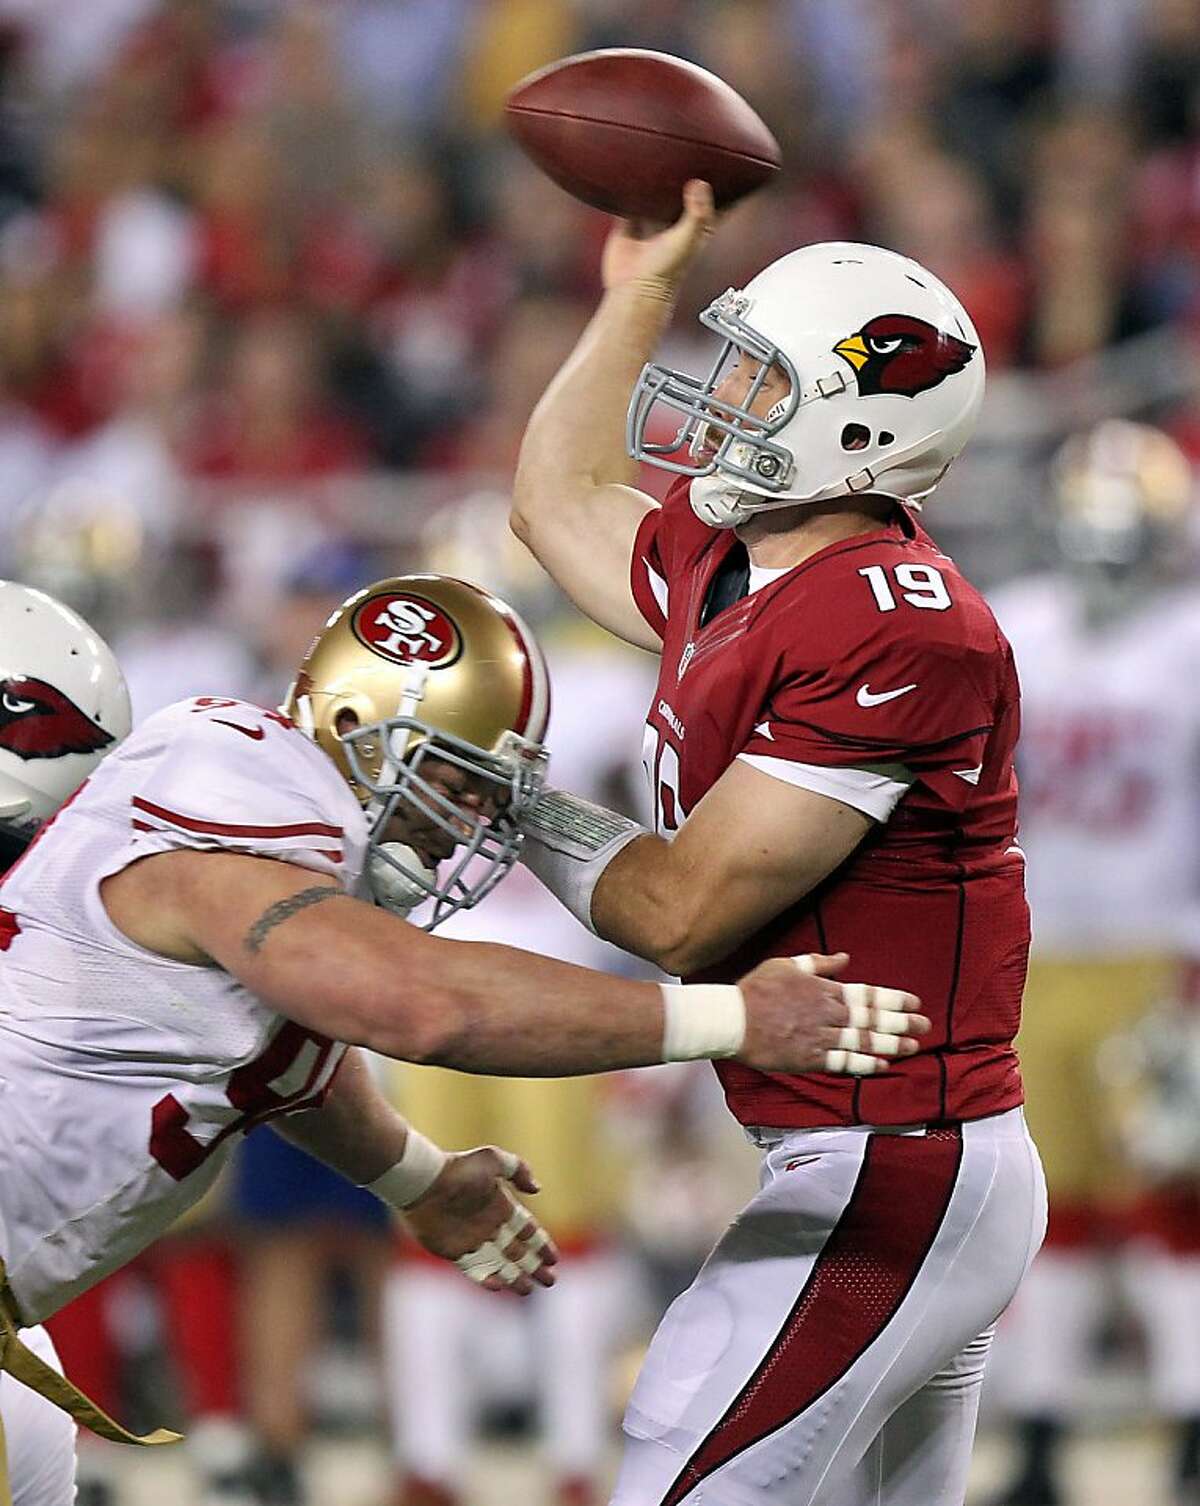 Arizona Cardinals quarterback John Skelton (19) looks to pass under pressure from San Francisco 49ers defensive end Justin Smith during the first half of an NFL football game, Monday, Oct. 29, 2012, in Glendale, Ariz. (AP Photo/Paul Connors)